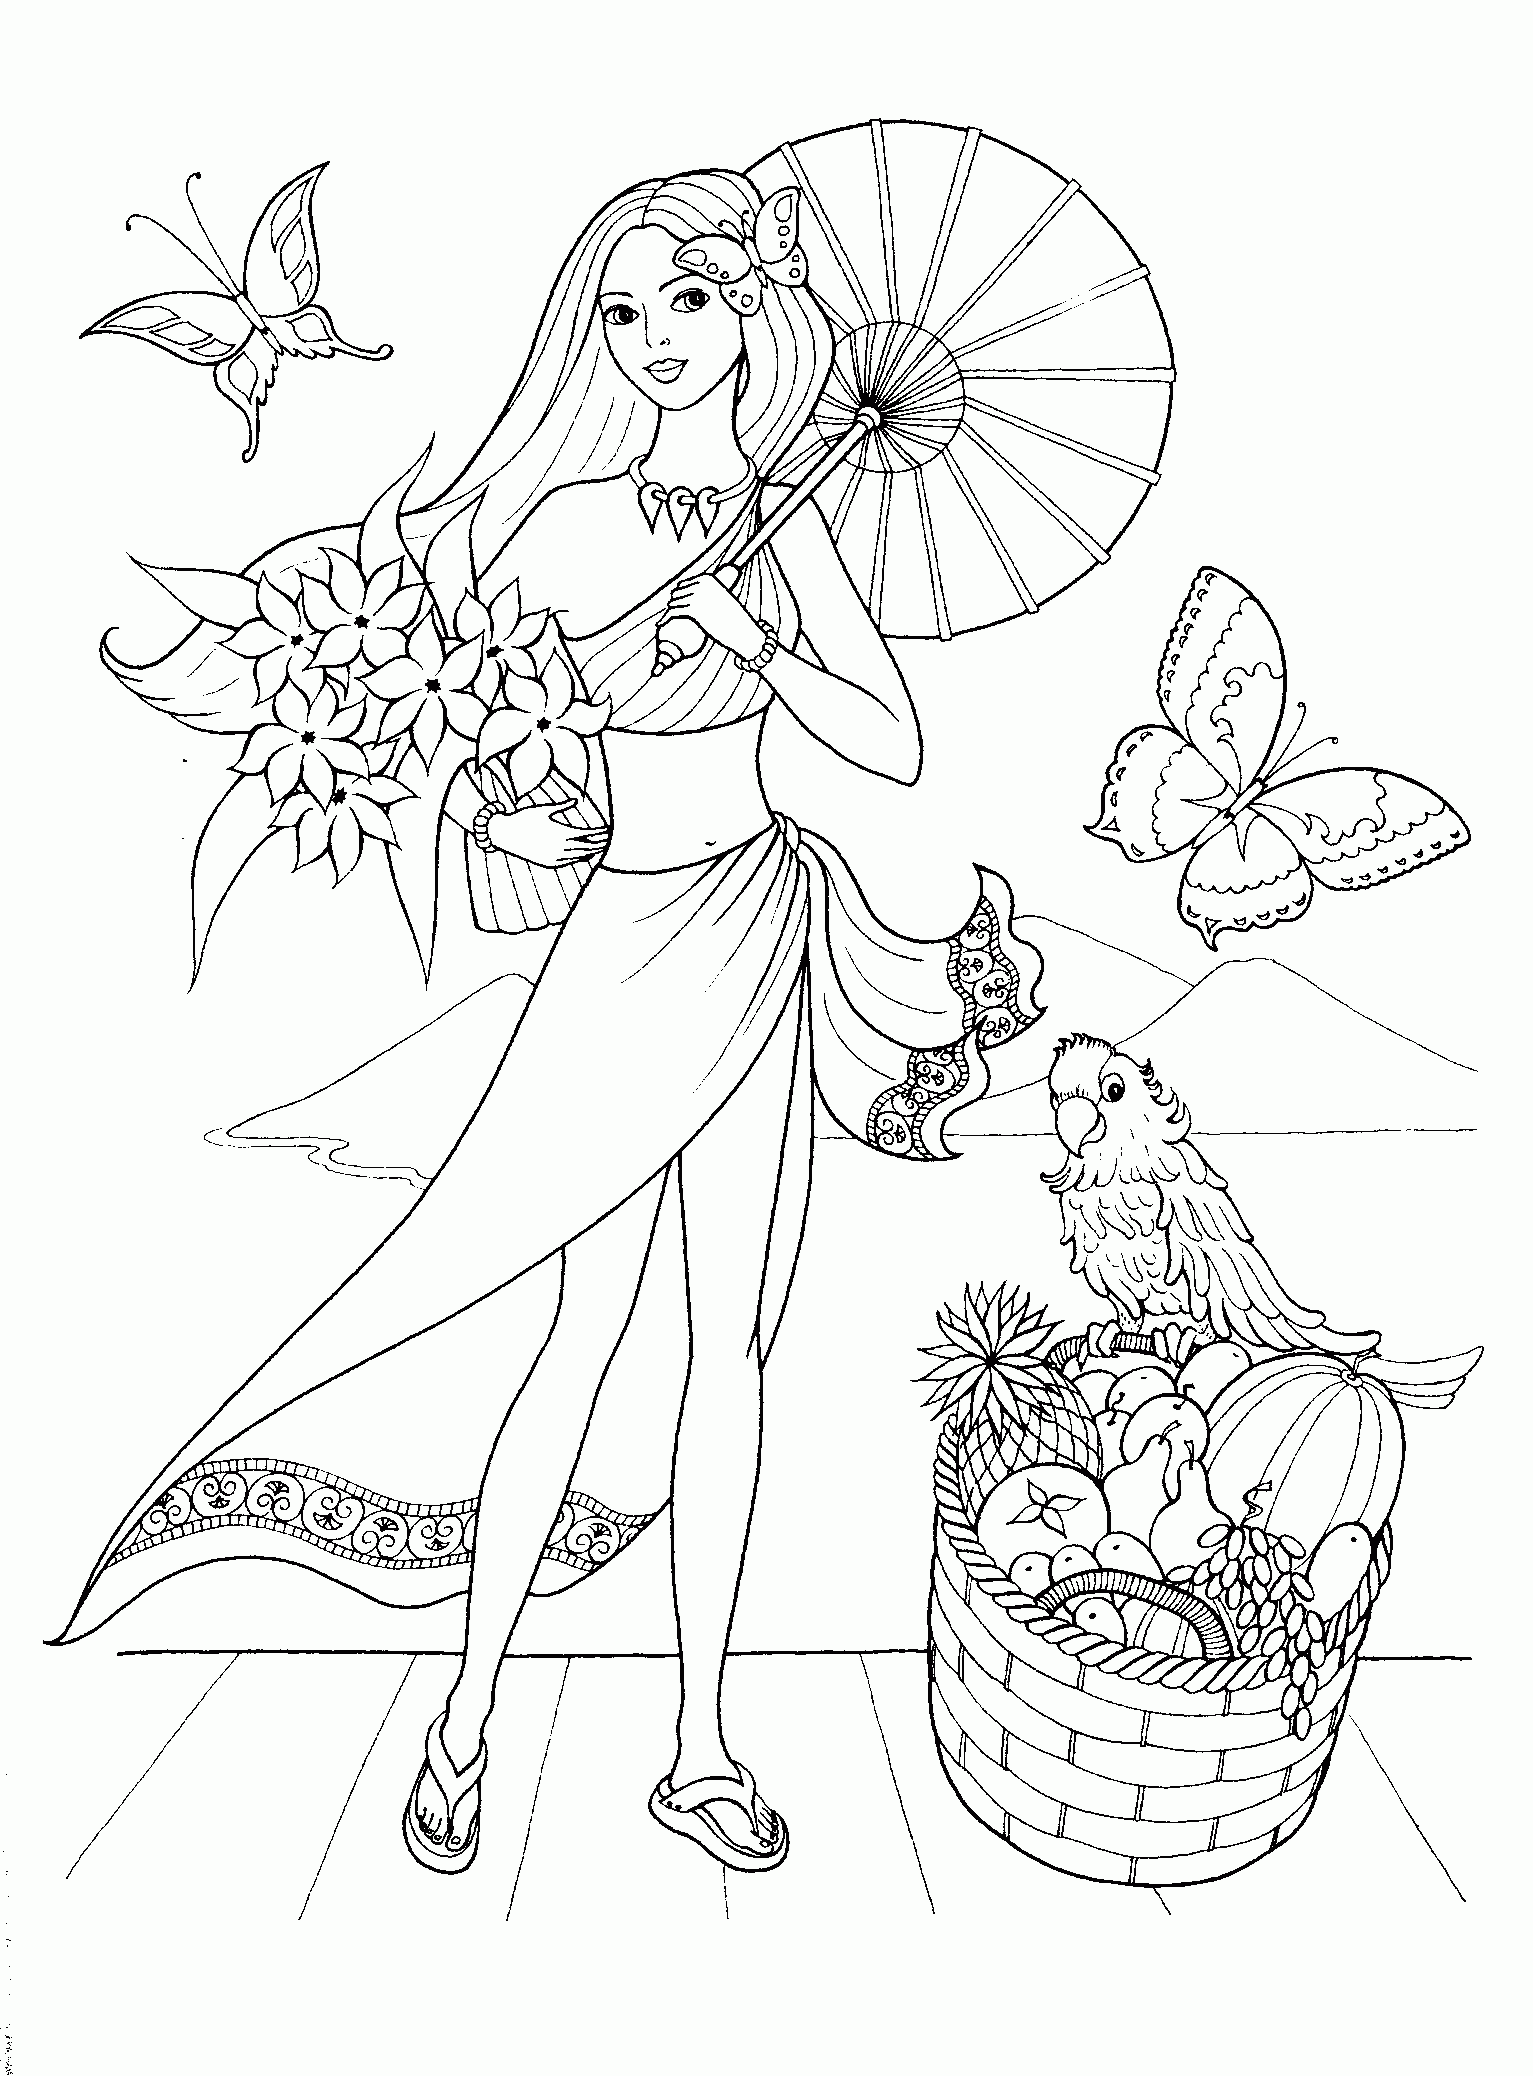 Fashion Coloring Pages For Girls Printable Coloring Home Click on the colouring page name to view all available colouring pages. fashion coloring pages for girls